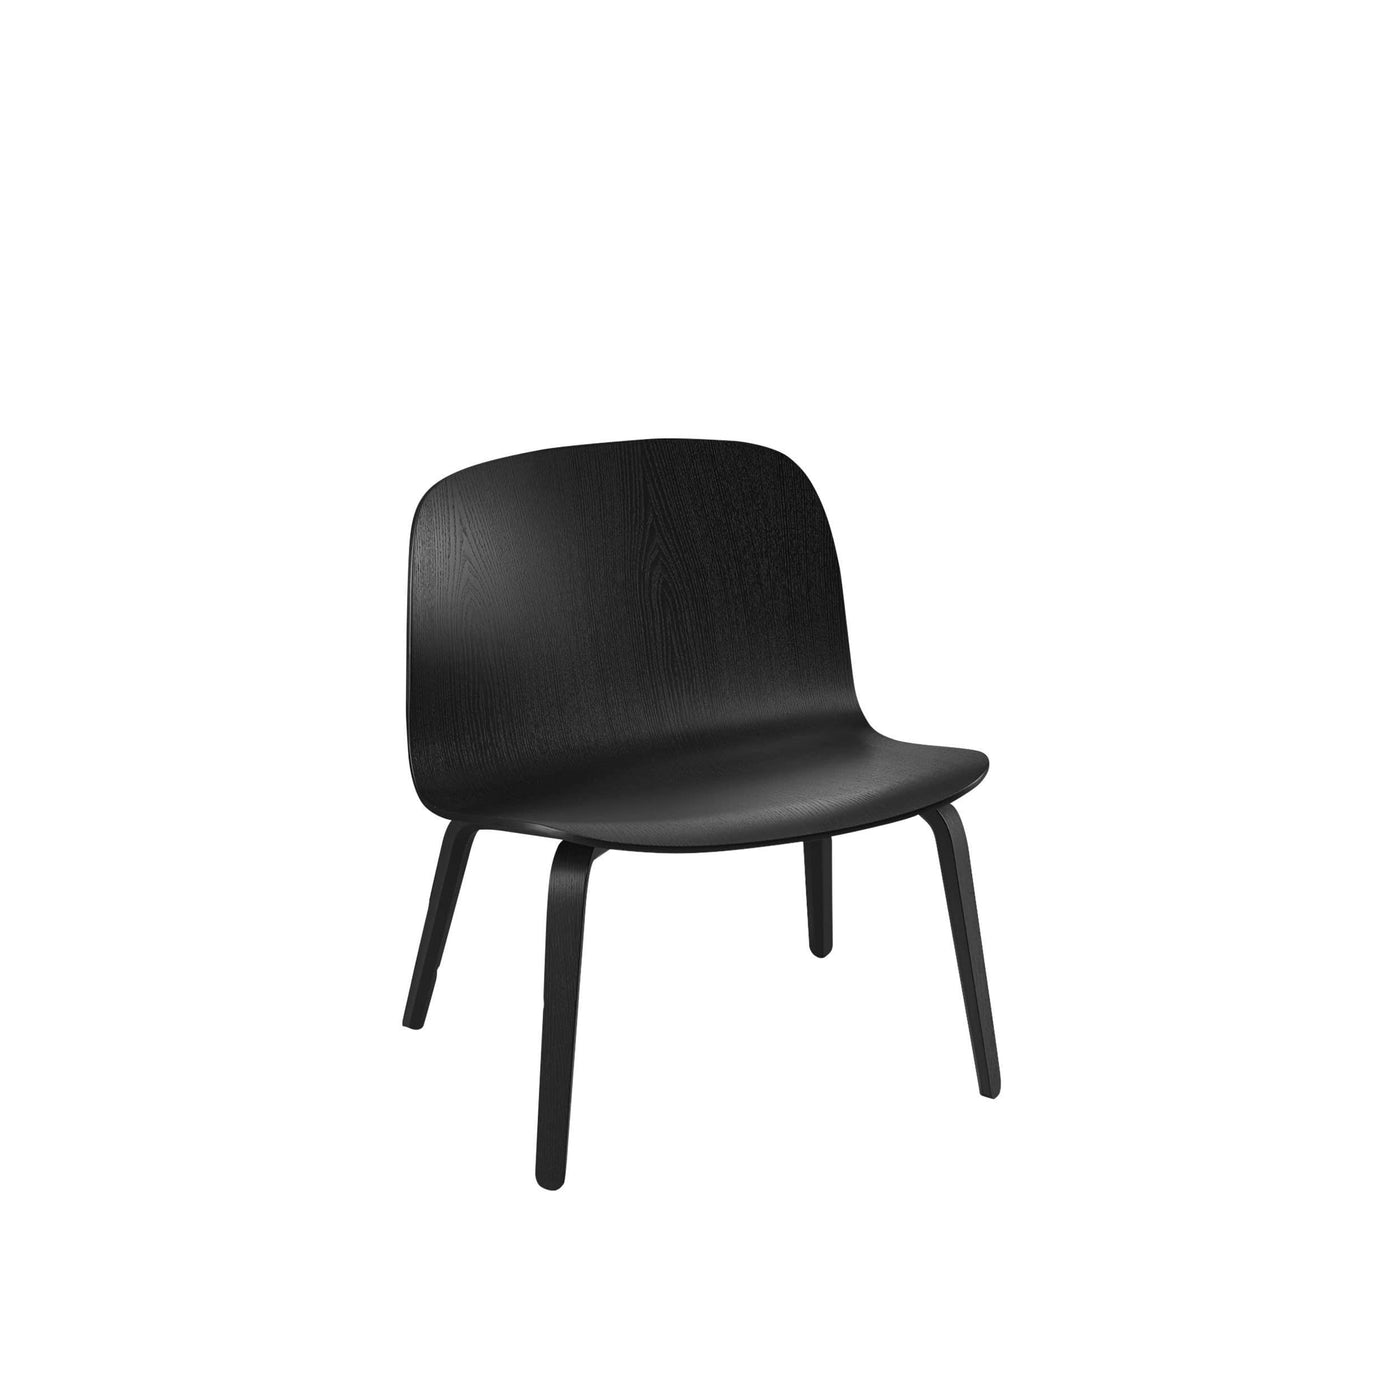 Muuto Visu Lounge Chair in black, available from someday designs. #colour_black